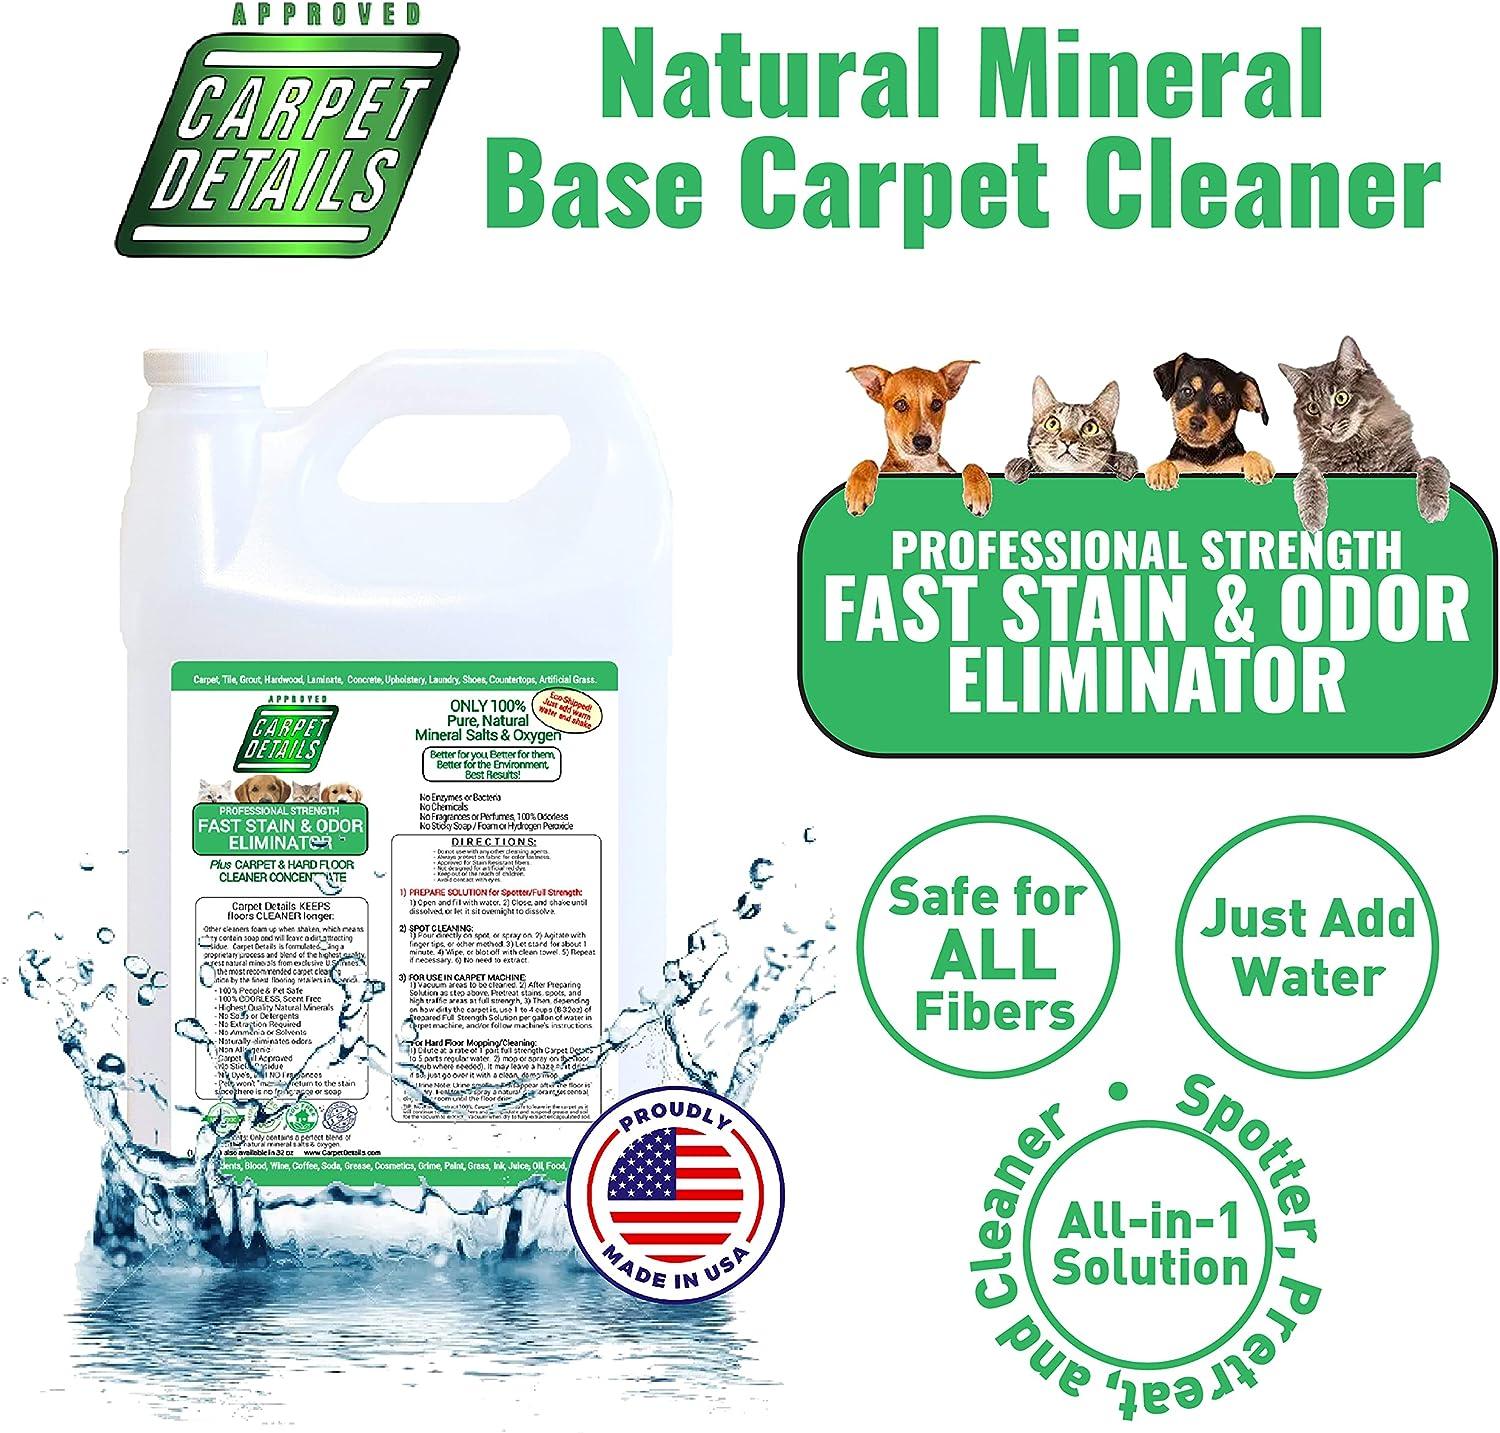 Carpet Details Carpet Stain Remover- Safe Natural Mineral Based Carpet  Cleaner Solution- Use on Tile, Grout, Laminate and Wood Floors, and Carpet